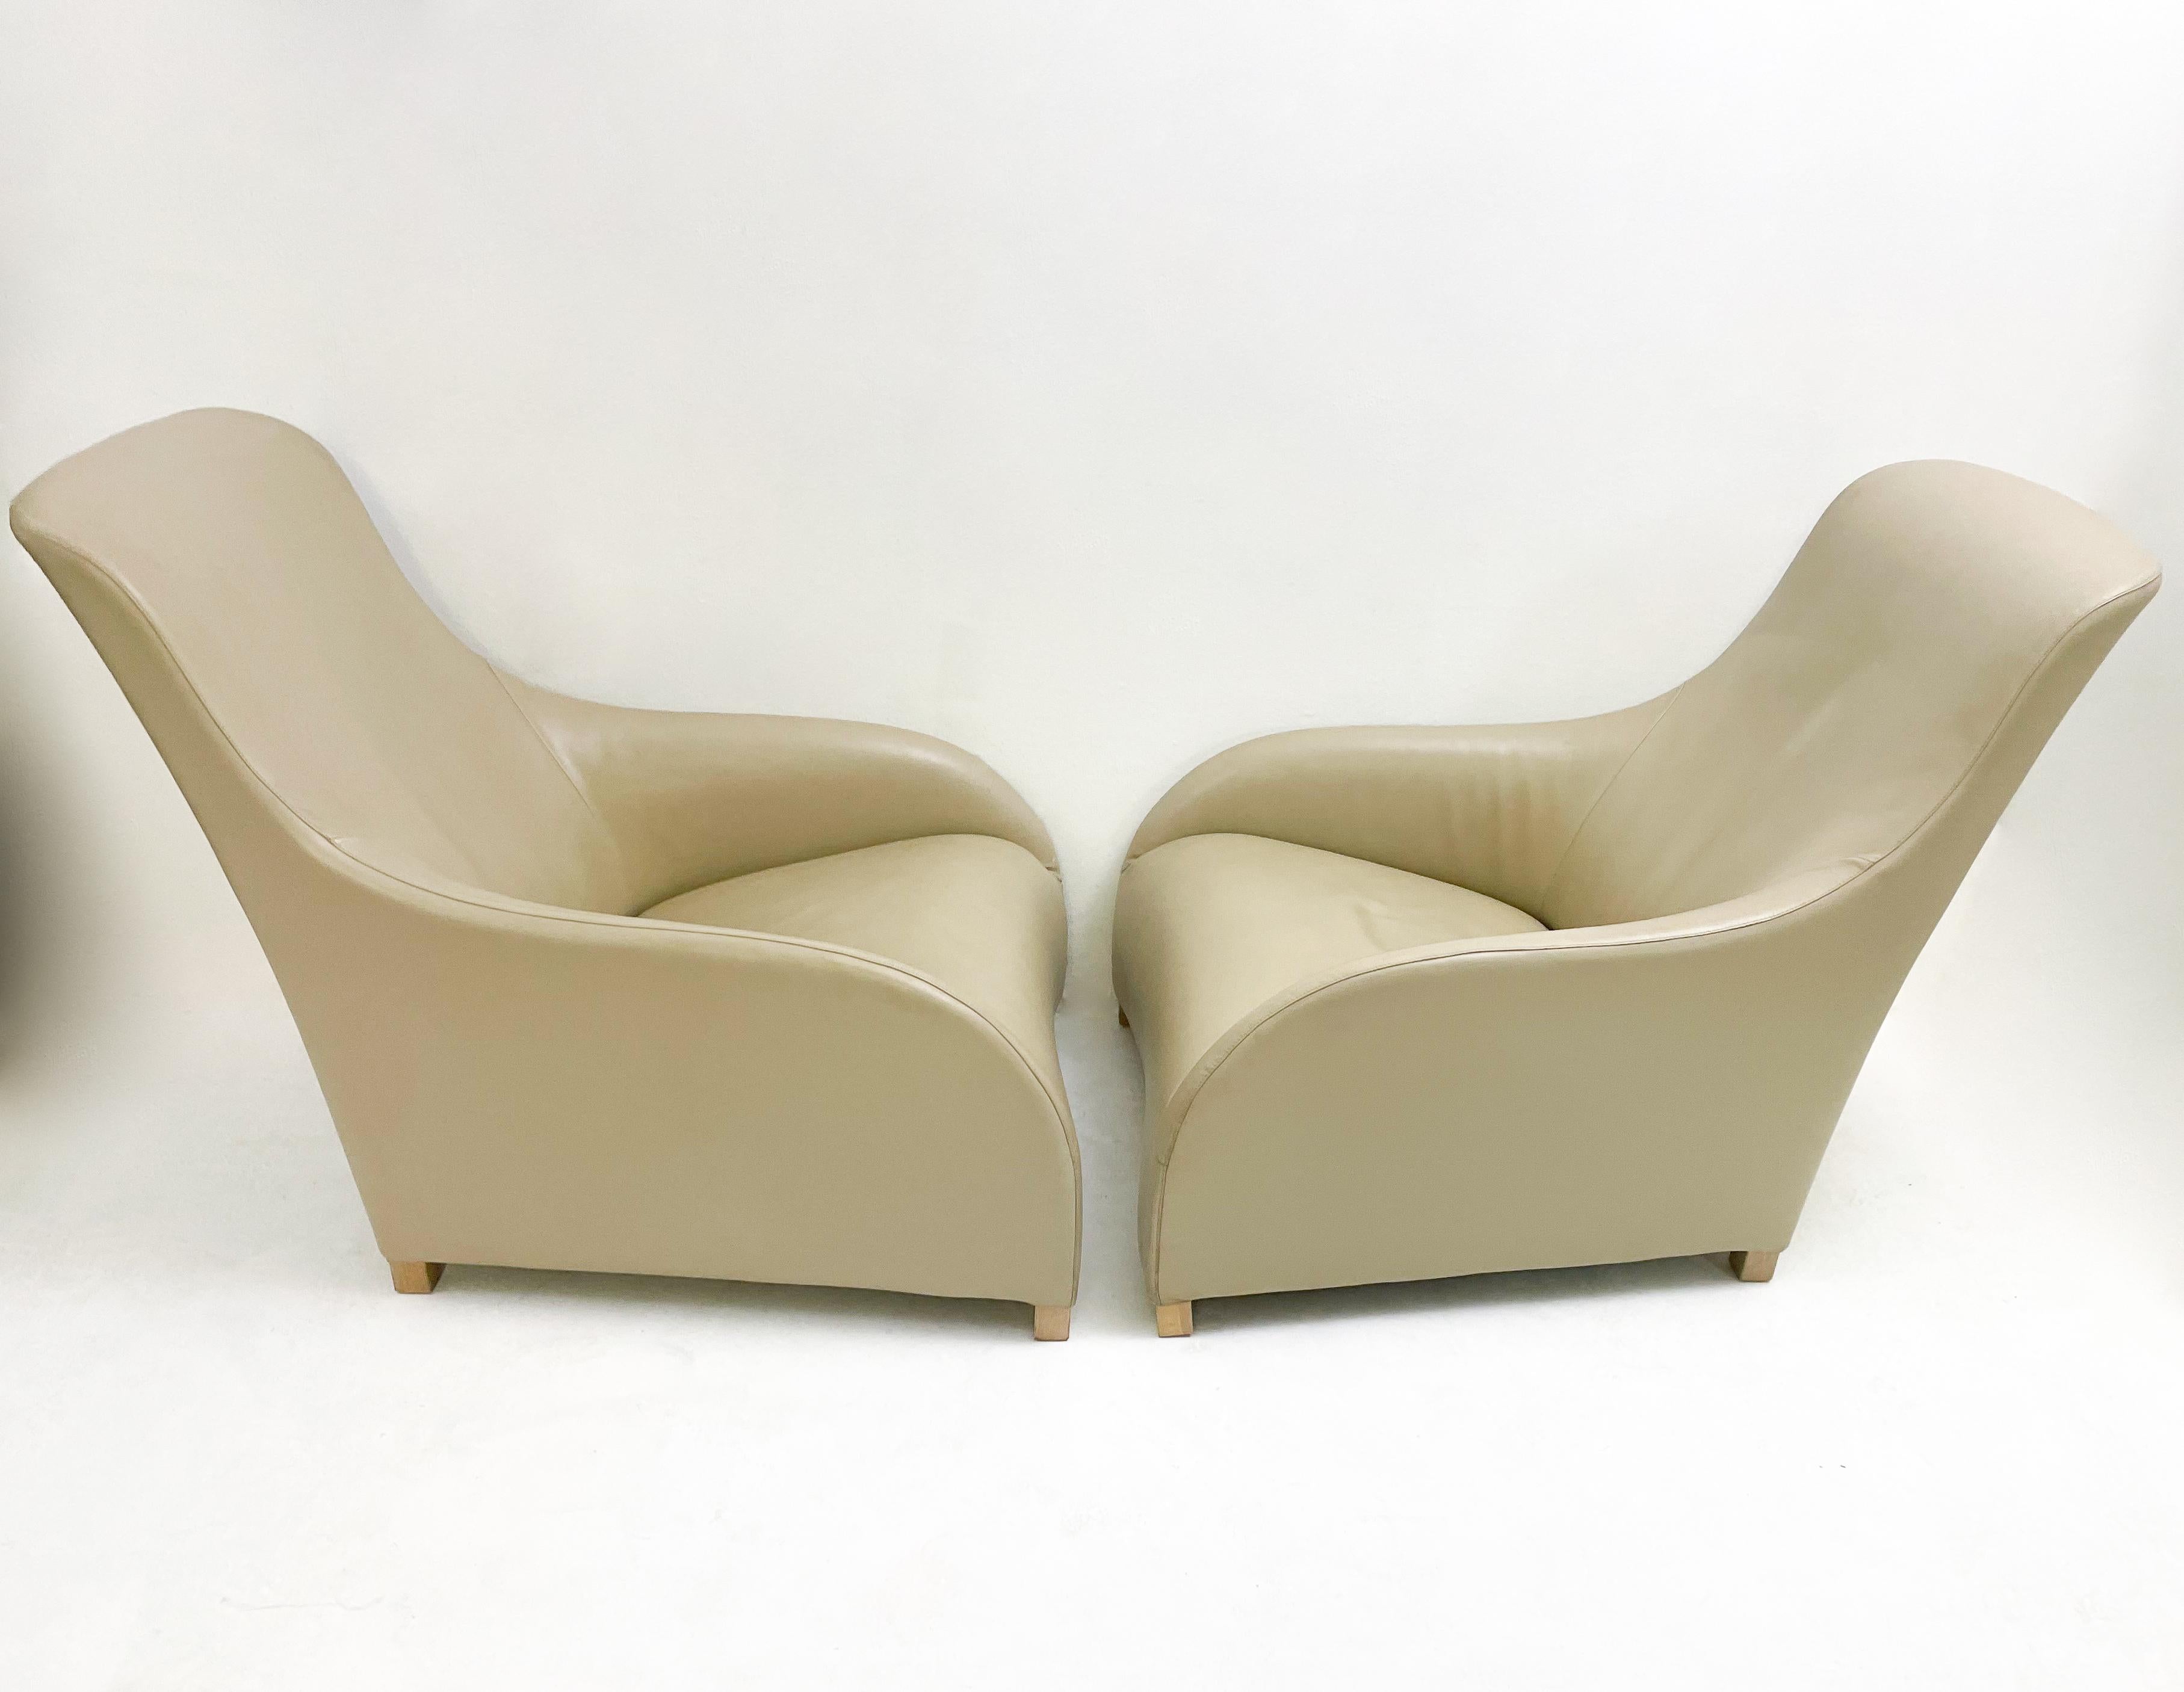 Leather Mid-Century Modern Pair of Kalos Armchairs by Antonio Citterio for B&B Italia For Sale